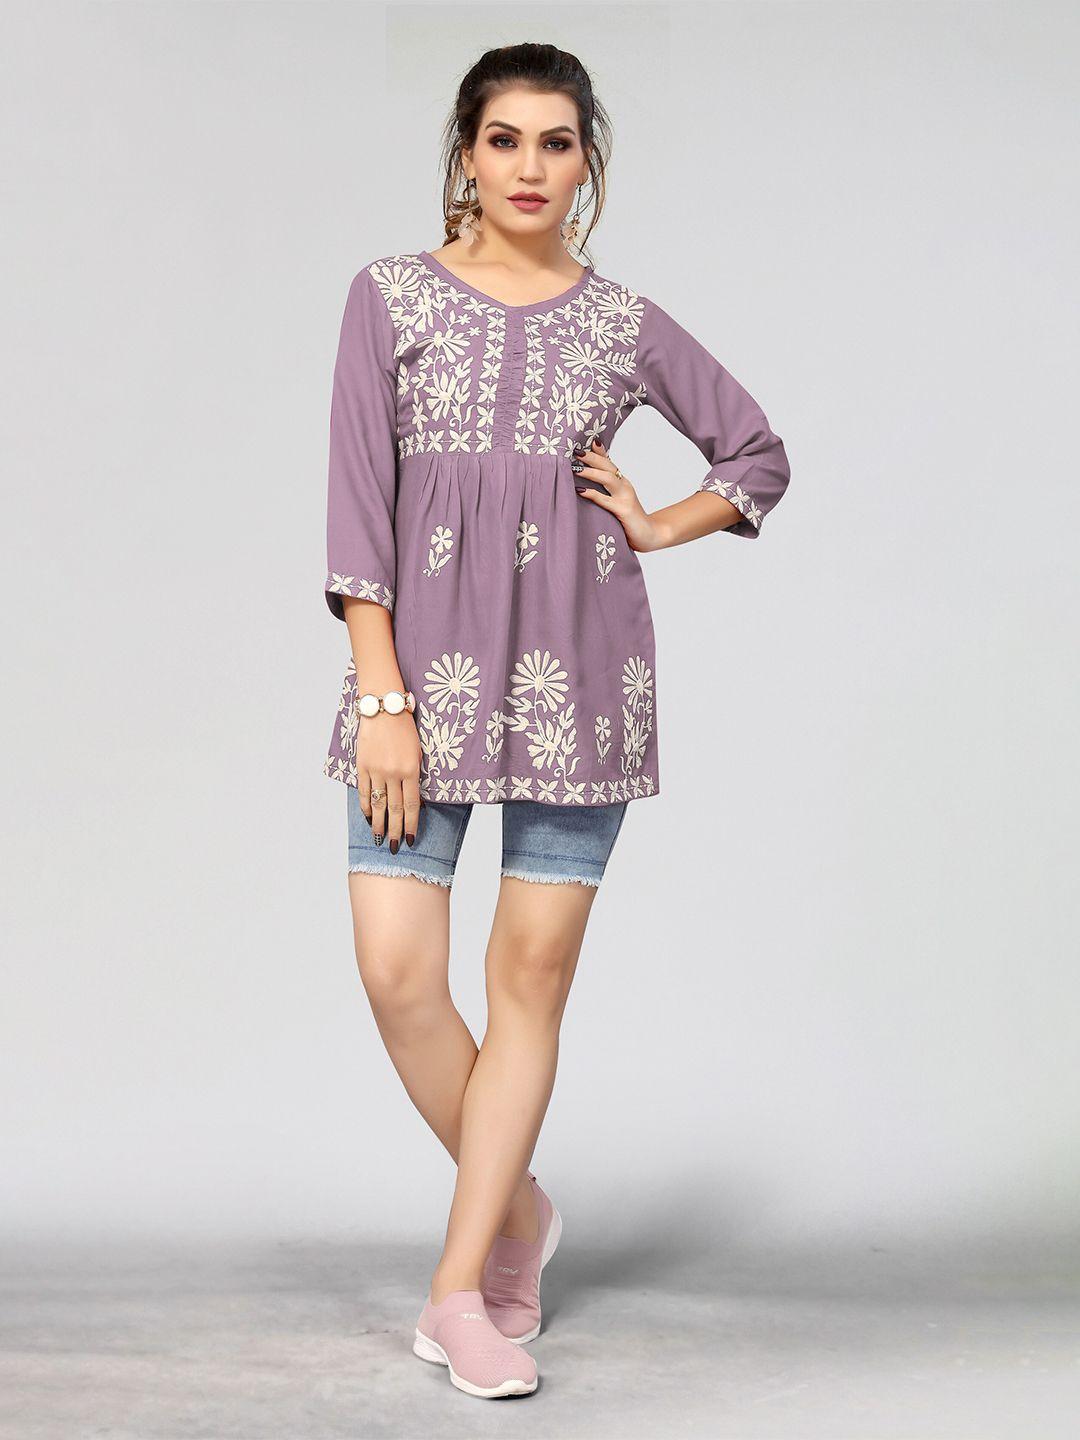 winza designer floral embroidered a line top